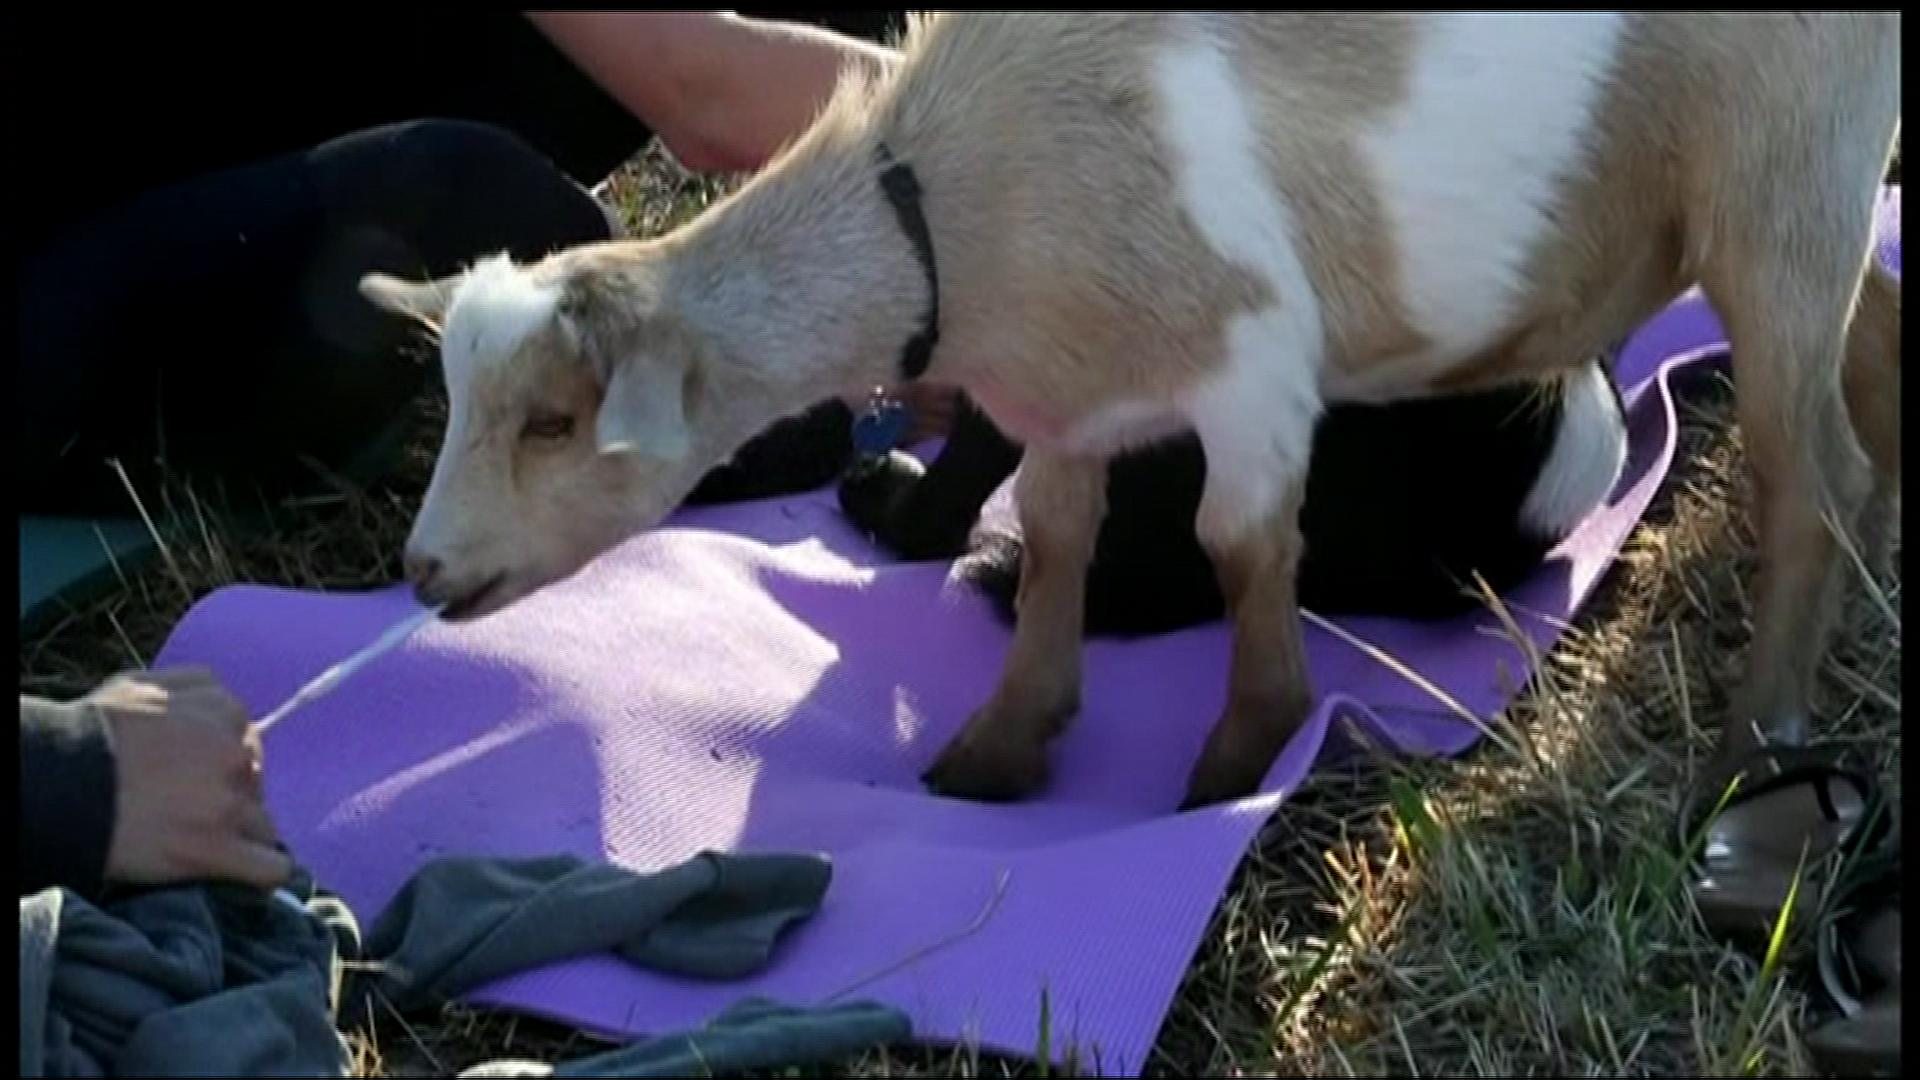 Yoga With Goats? No KiddingYou Gotta See This